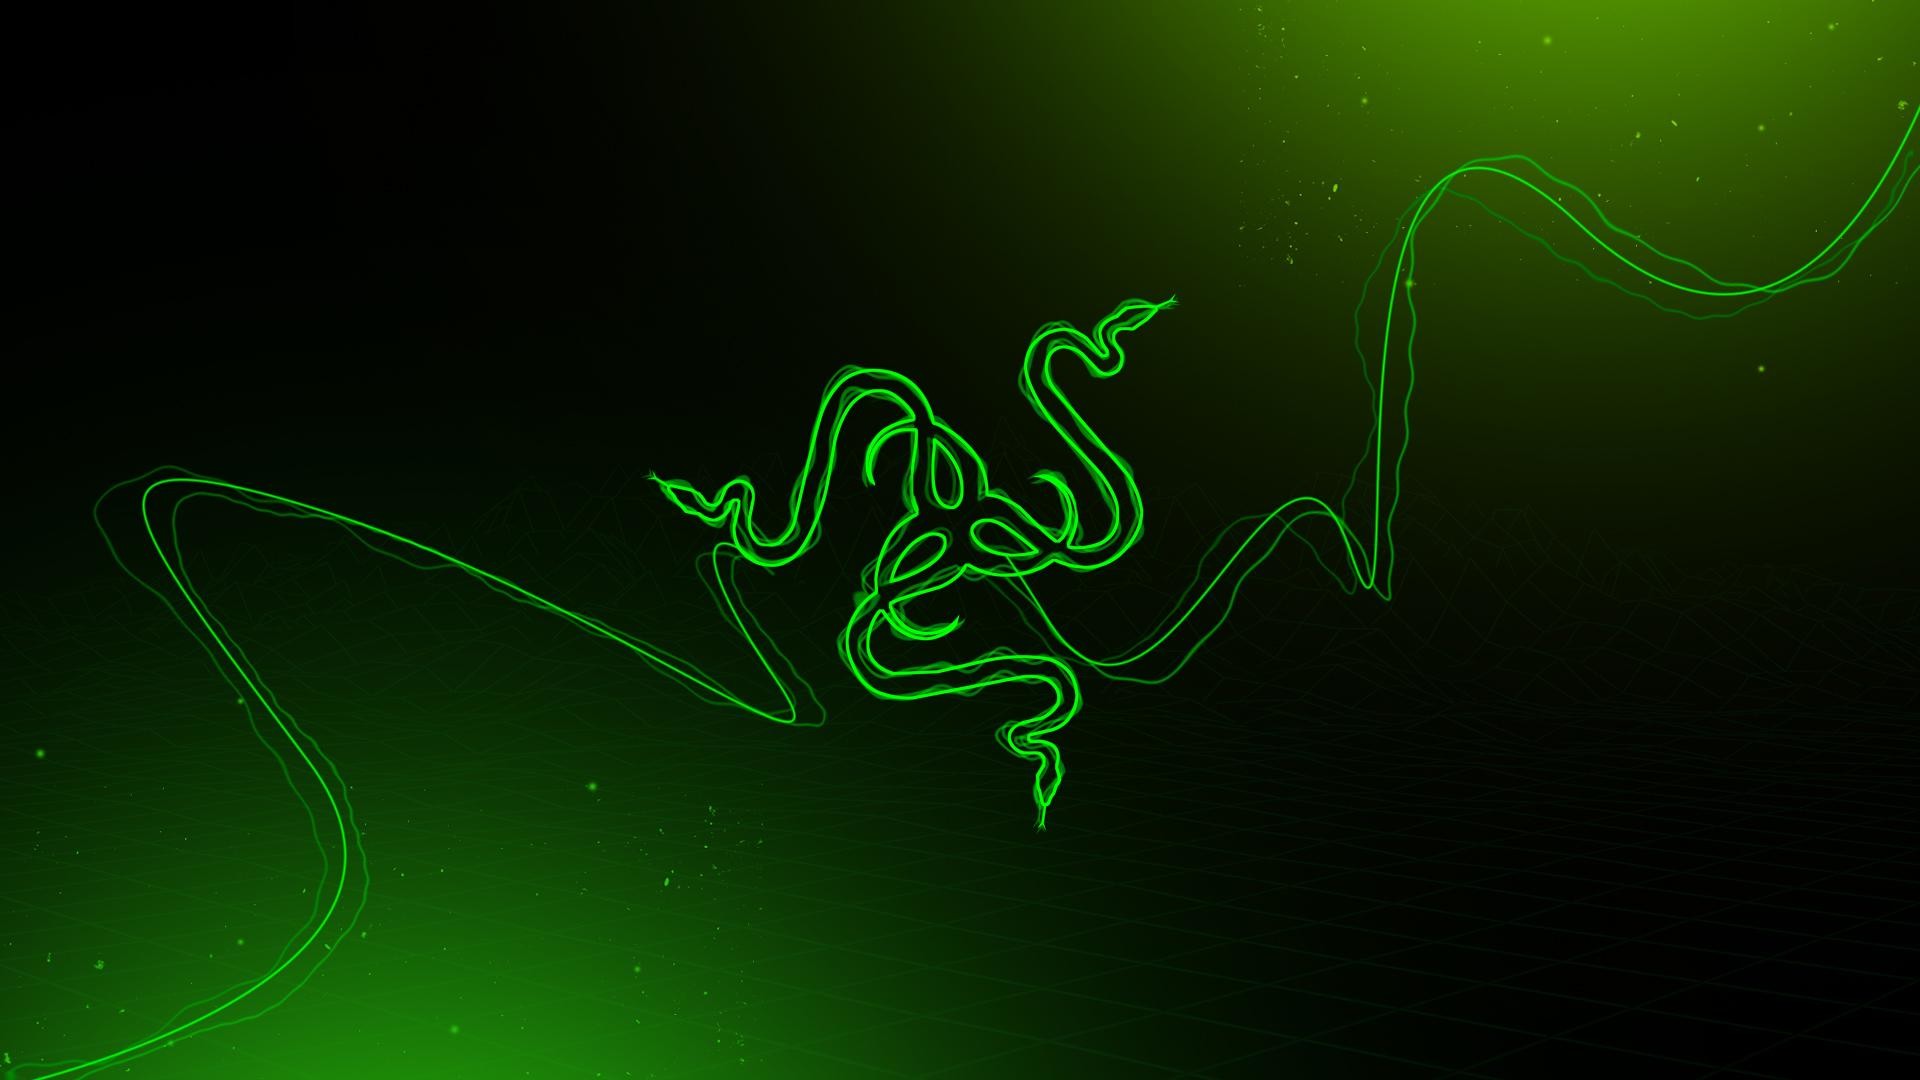 1920x1080 Original Razer wallpaper, feel free to use for your personal use.